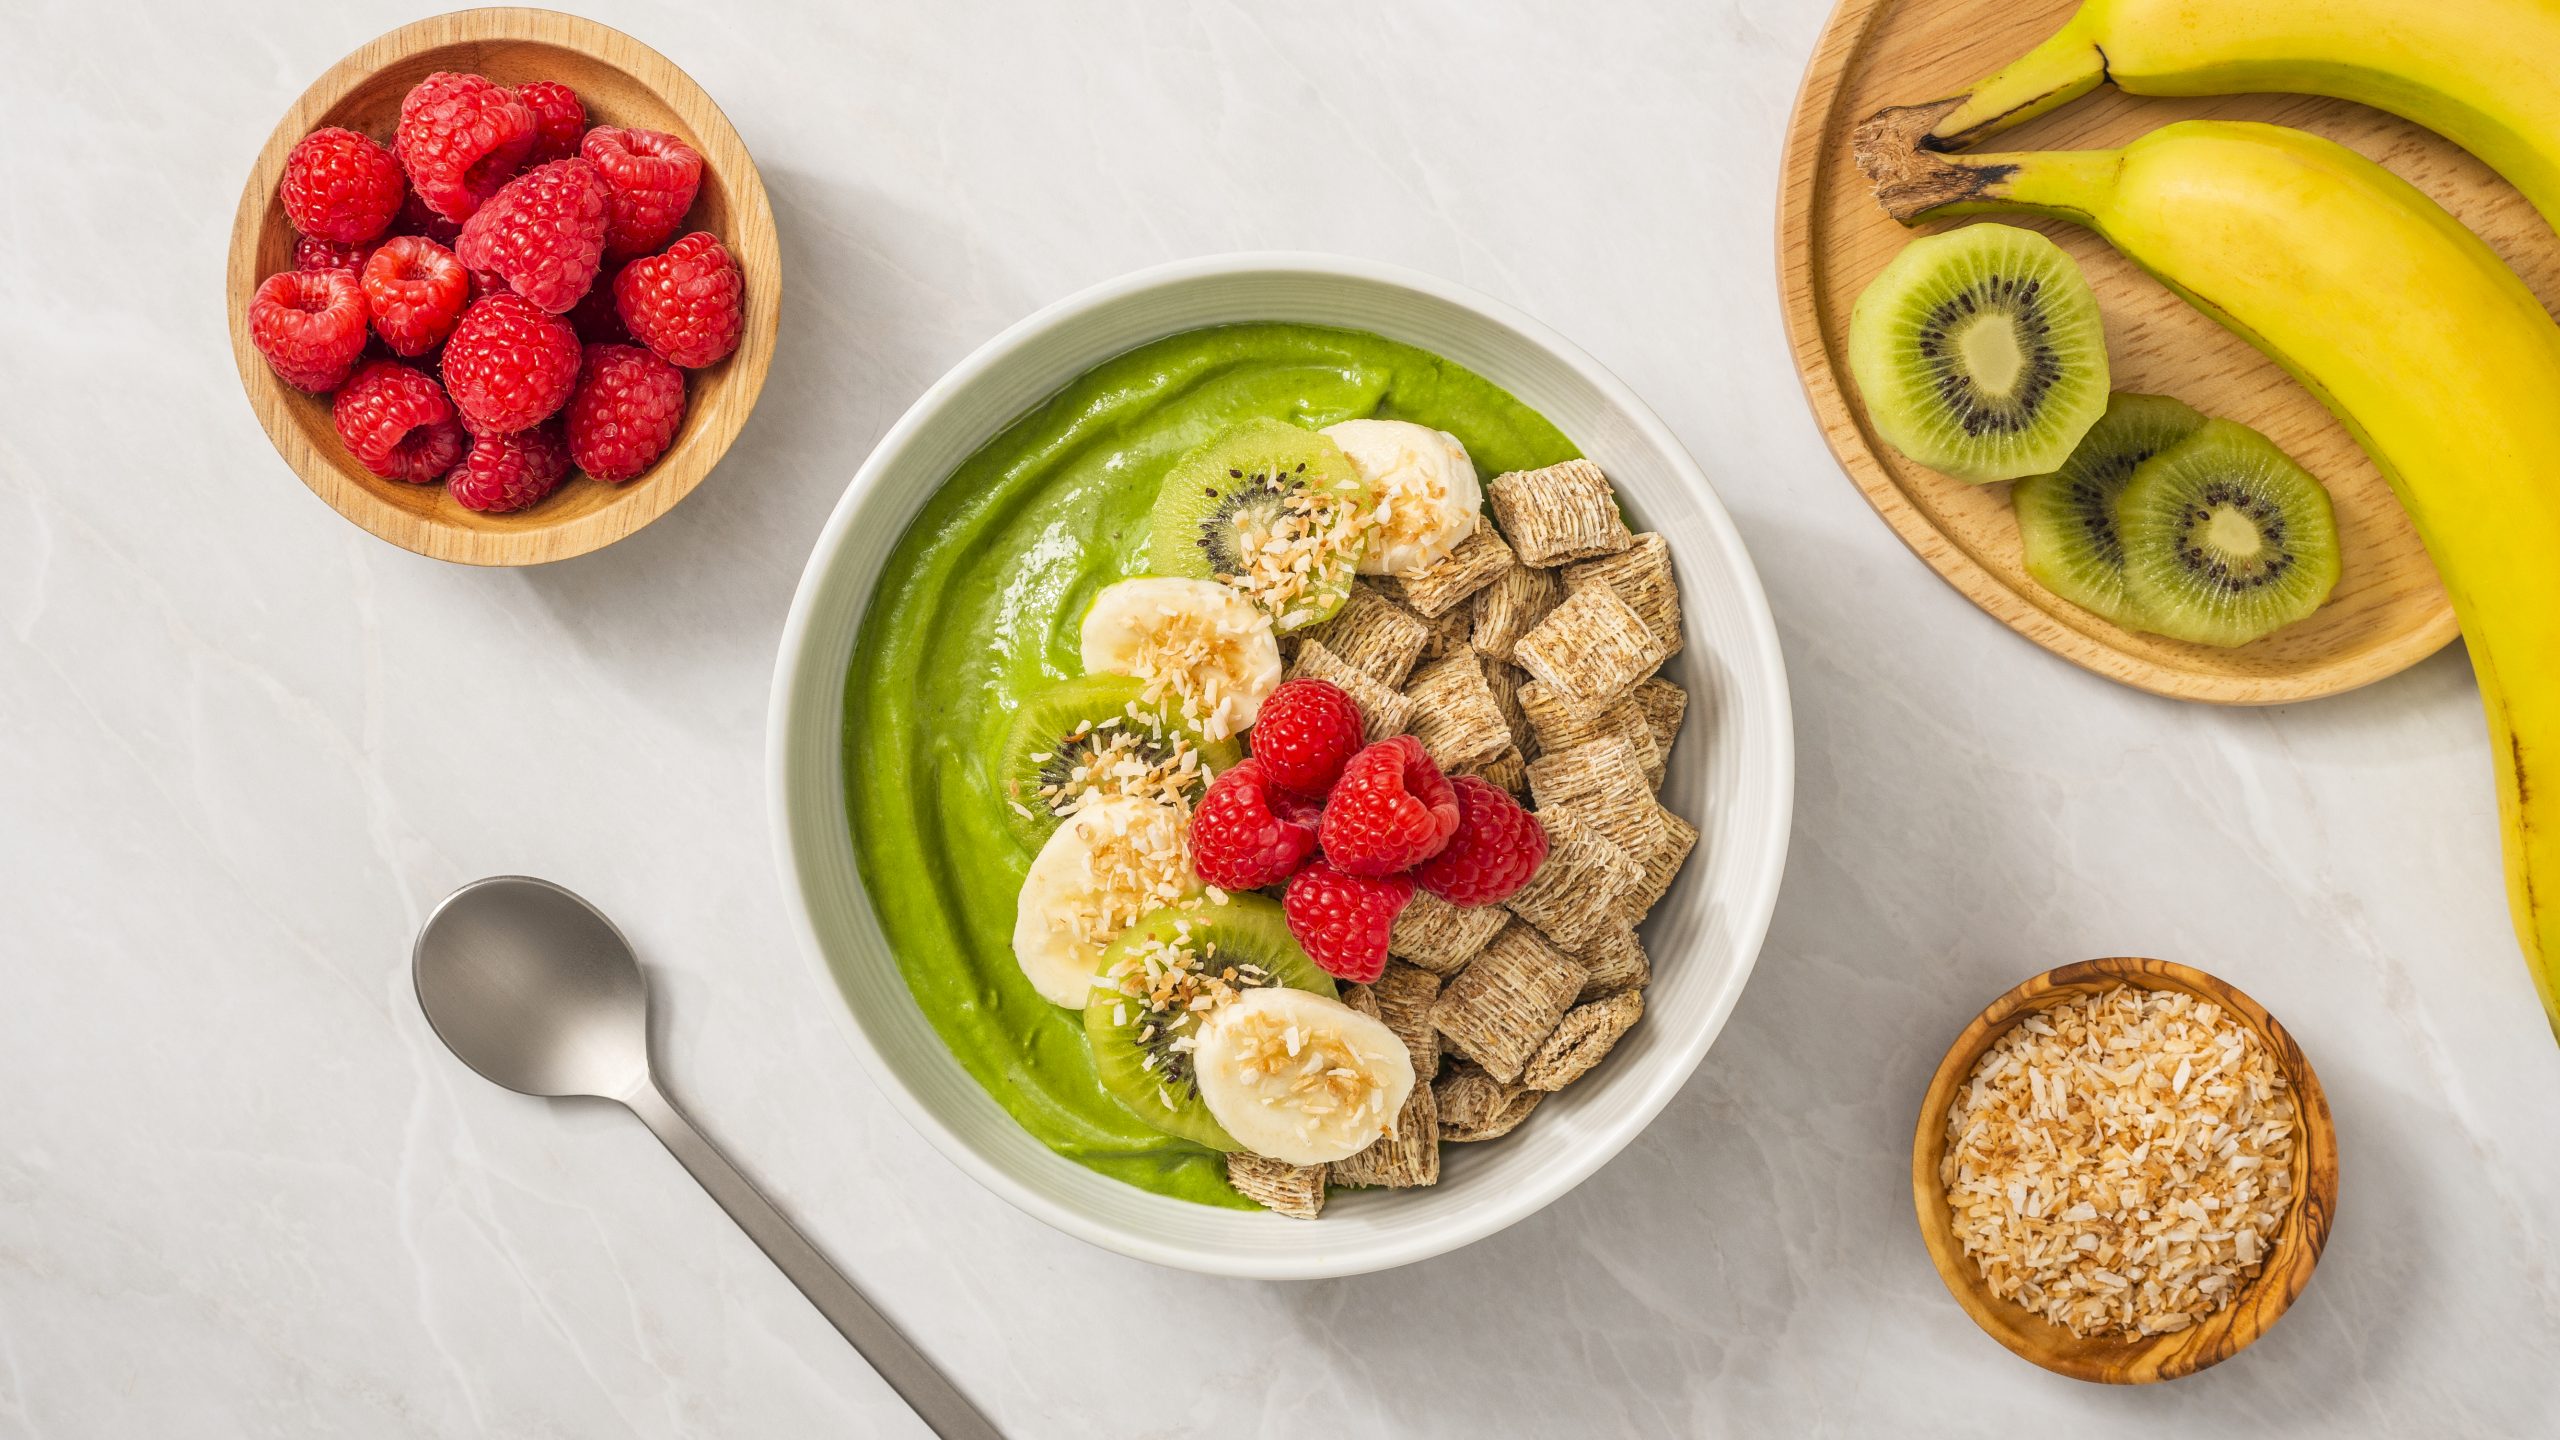 Green Goddess smoothie made with Shredded Wheat in a white bowl with bannana slices and raspberries on top. Sliced kiwi, banannas and raspberries in seperate bowls